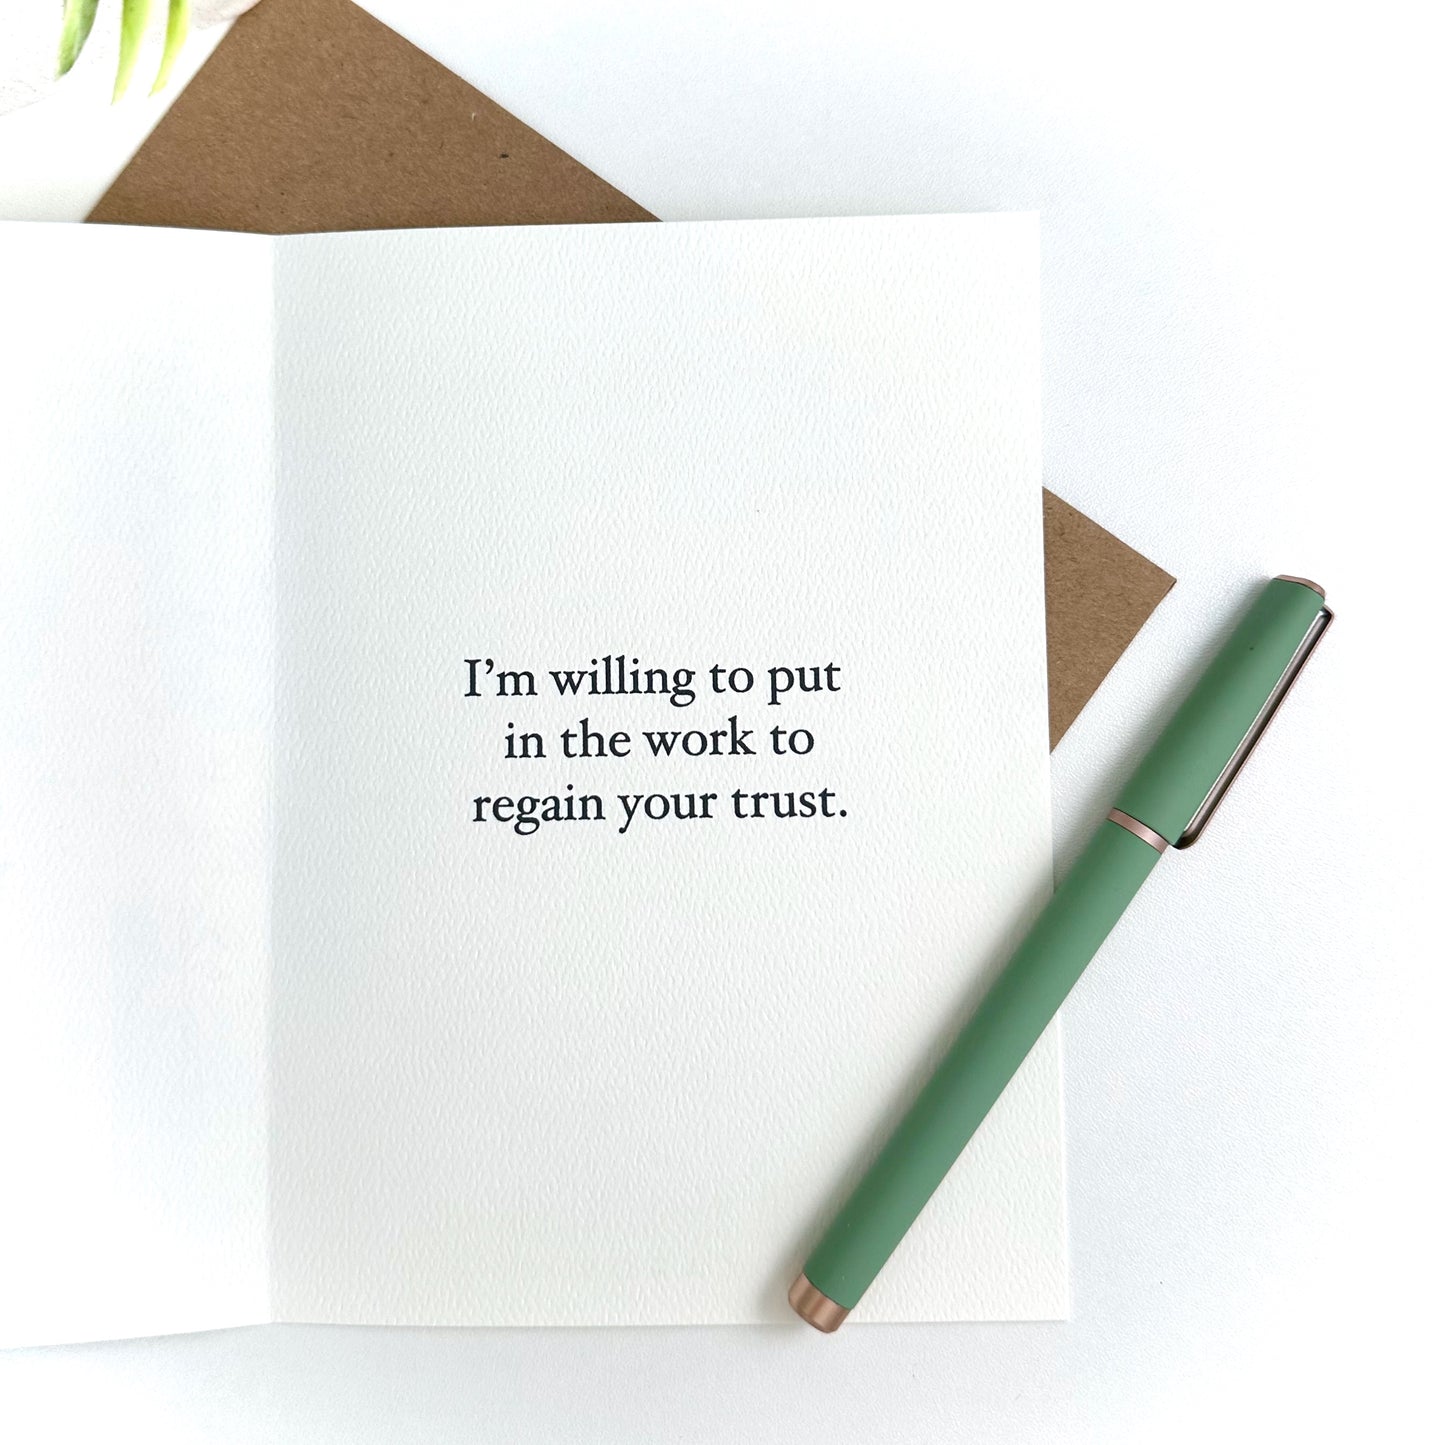 Apology Breakup Relationship Greeting Card